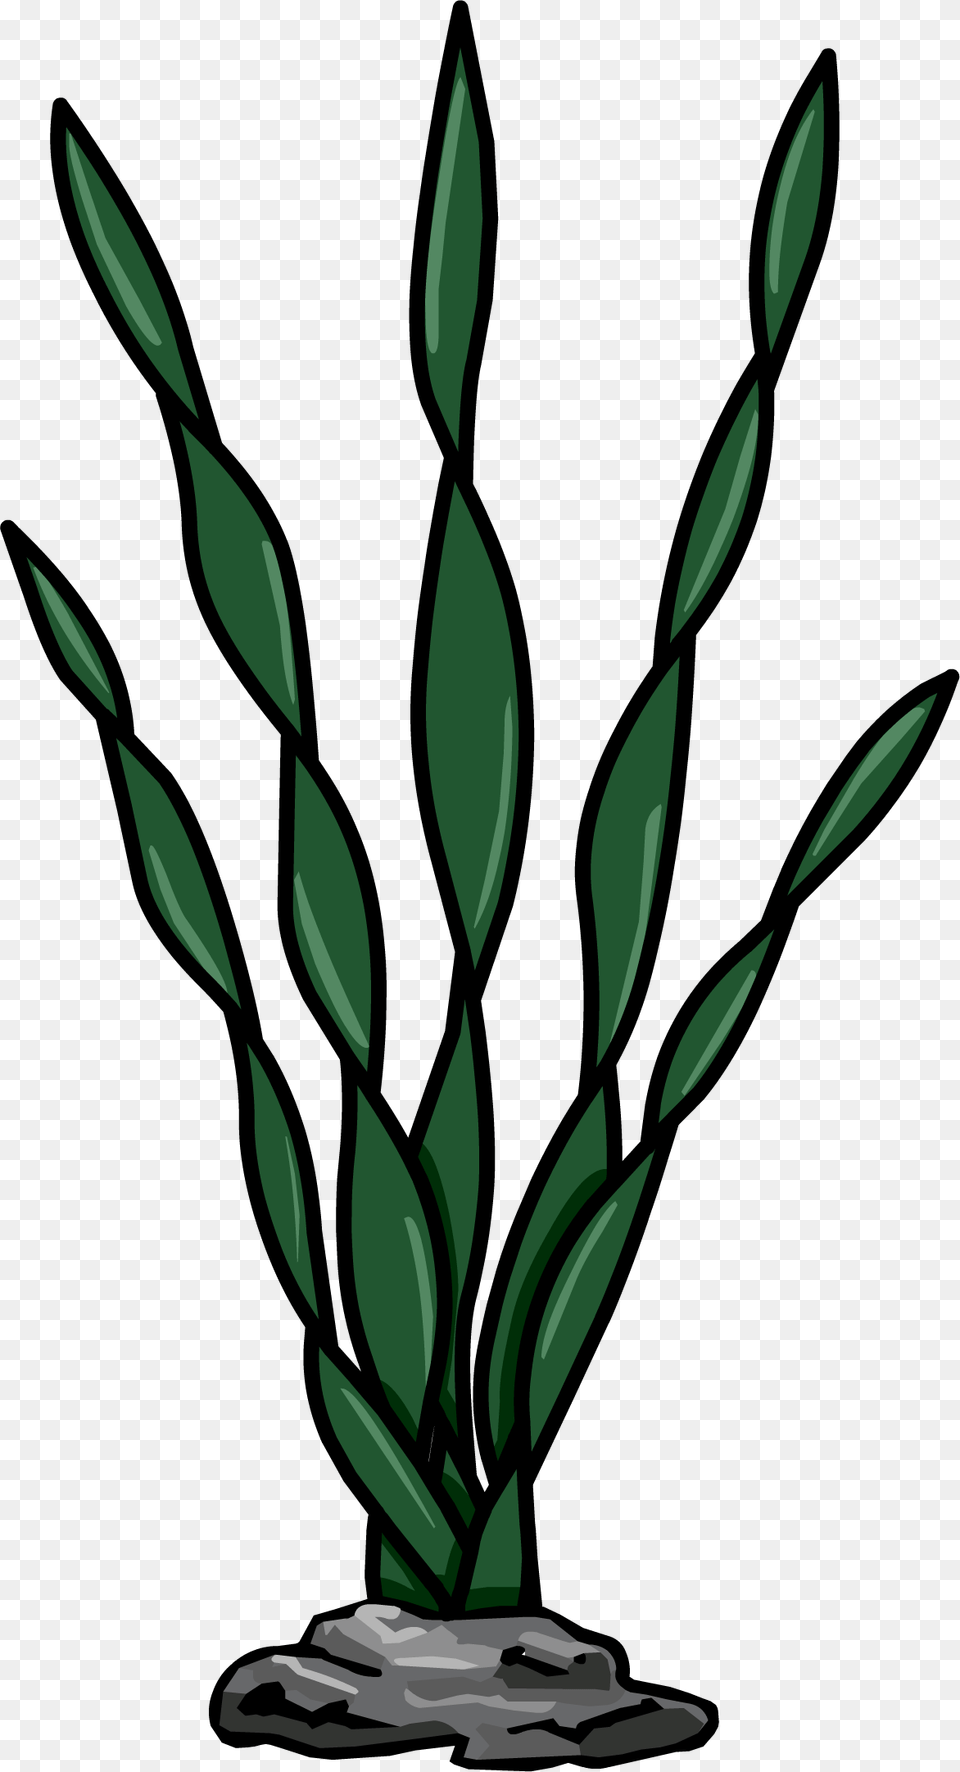 Sea Weed Club Penguin Seaweed, Green, Plant, Potted Plant, Flower Png Image